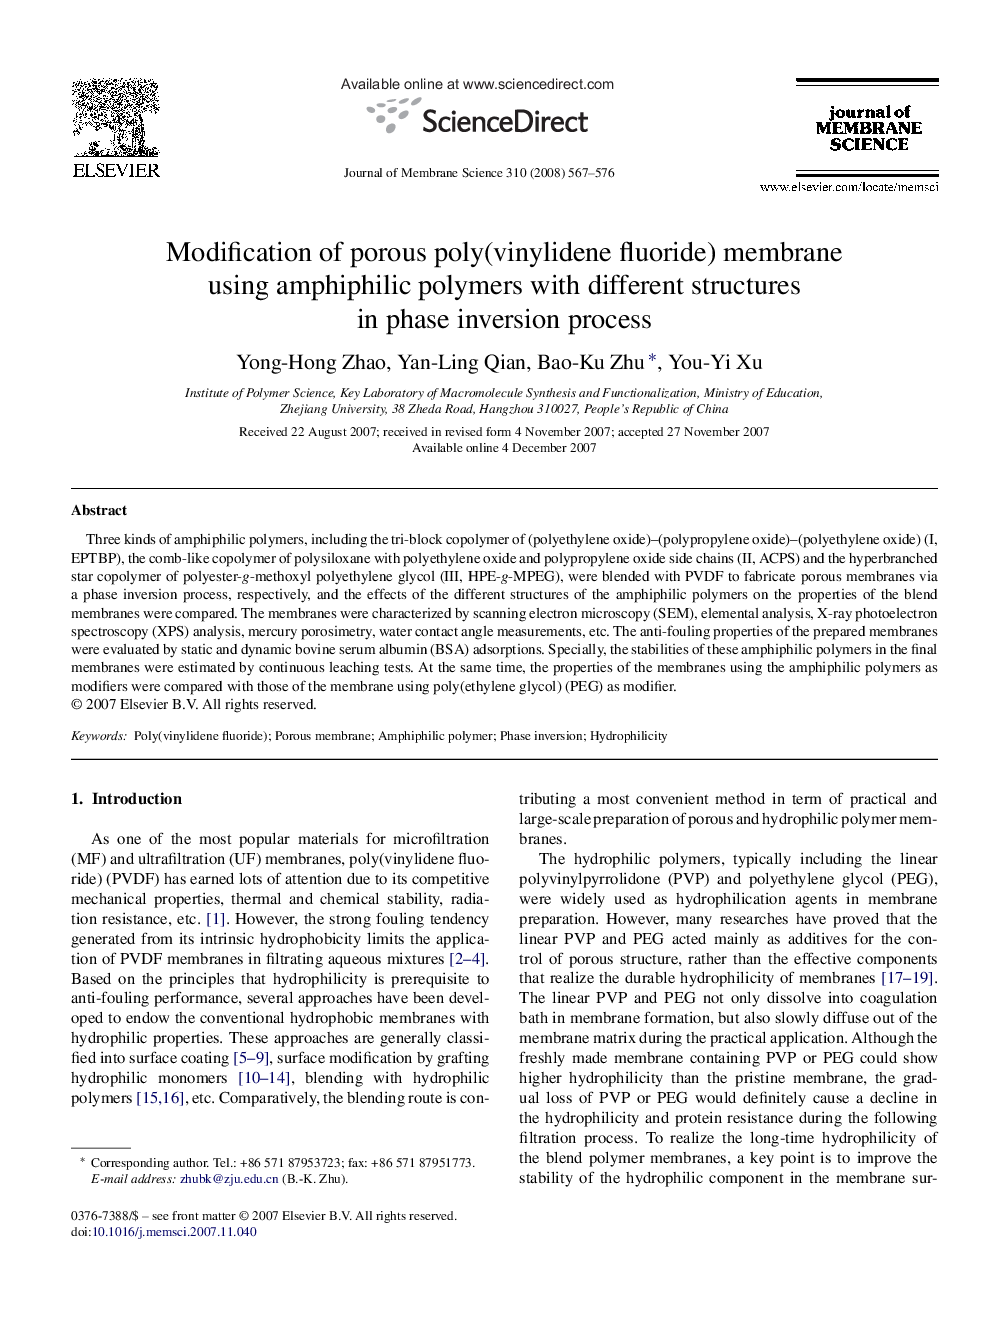 Modification of porous poly(vinylidene fluoride) membrane using amphiphilic polymers with different structures in phase inversion process